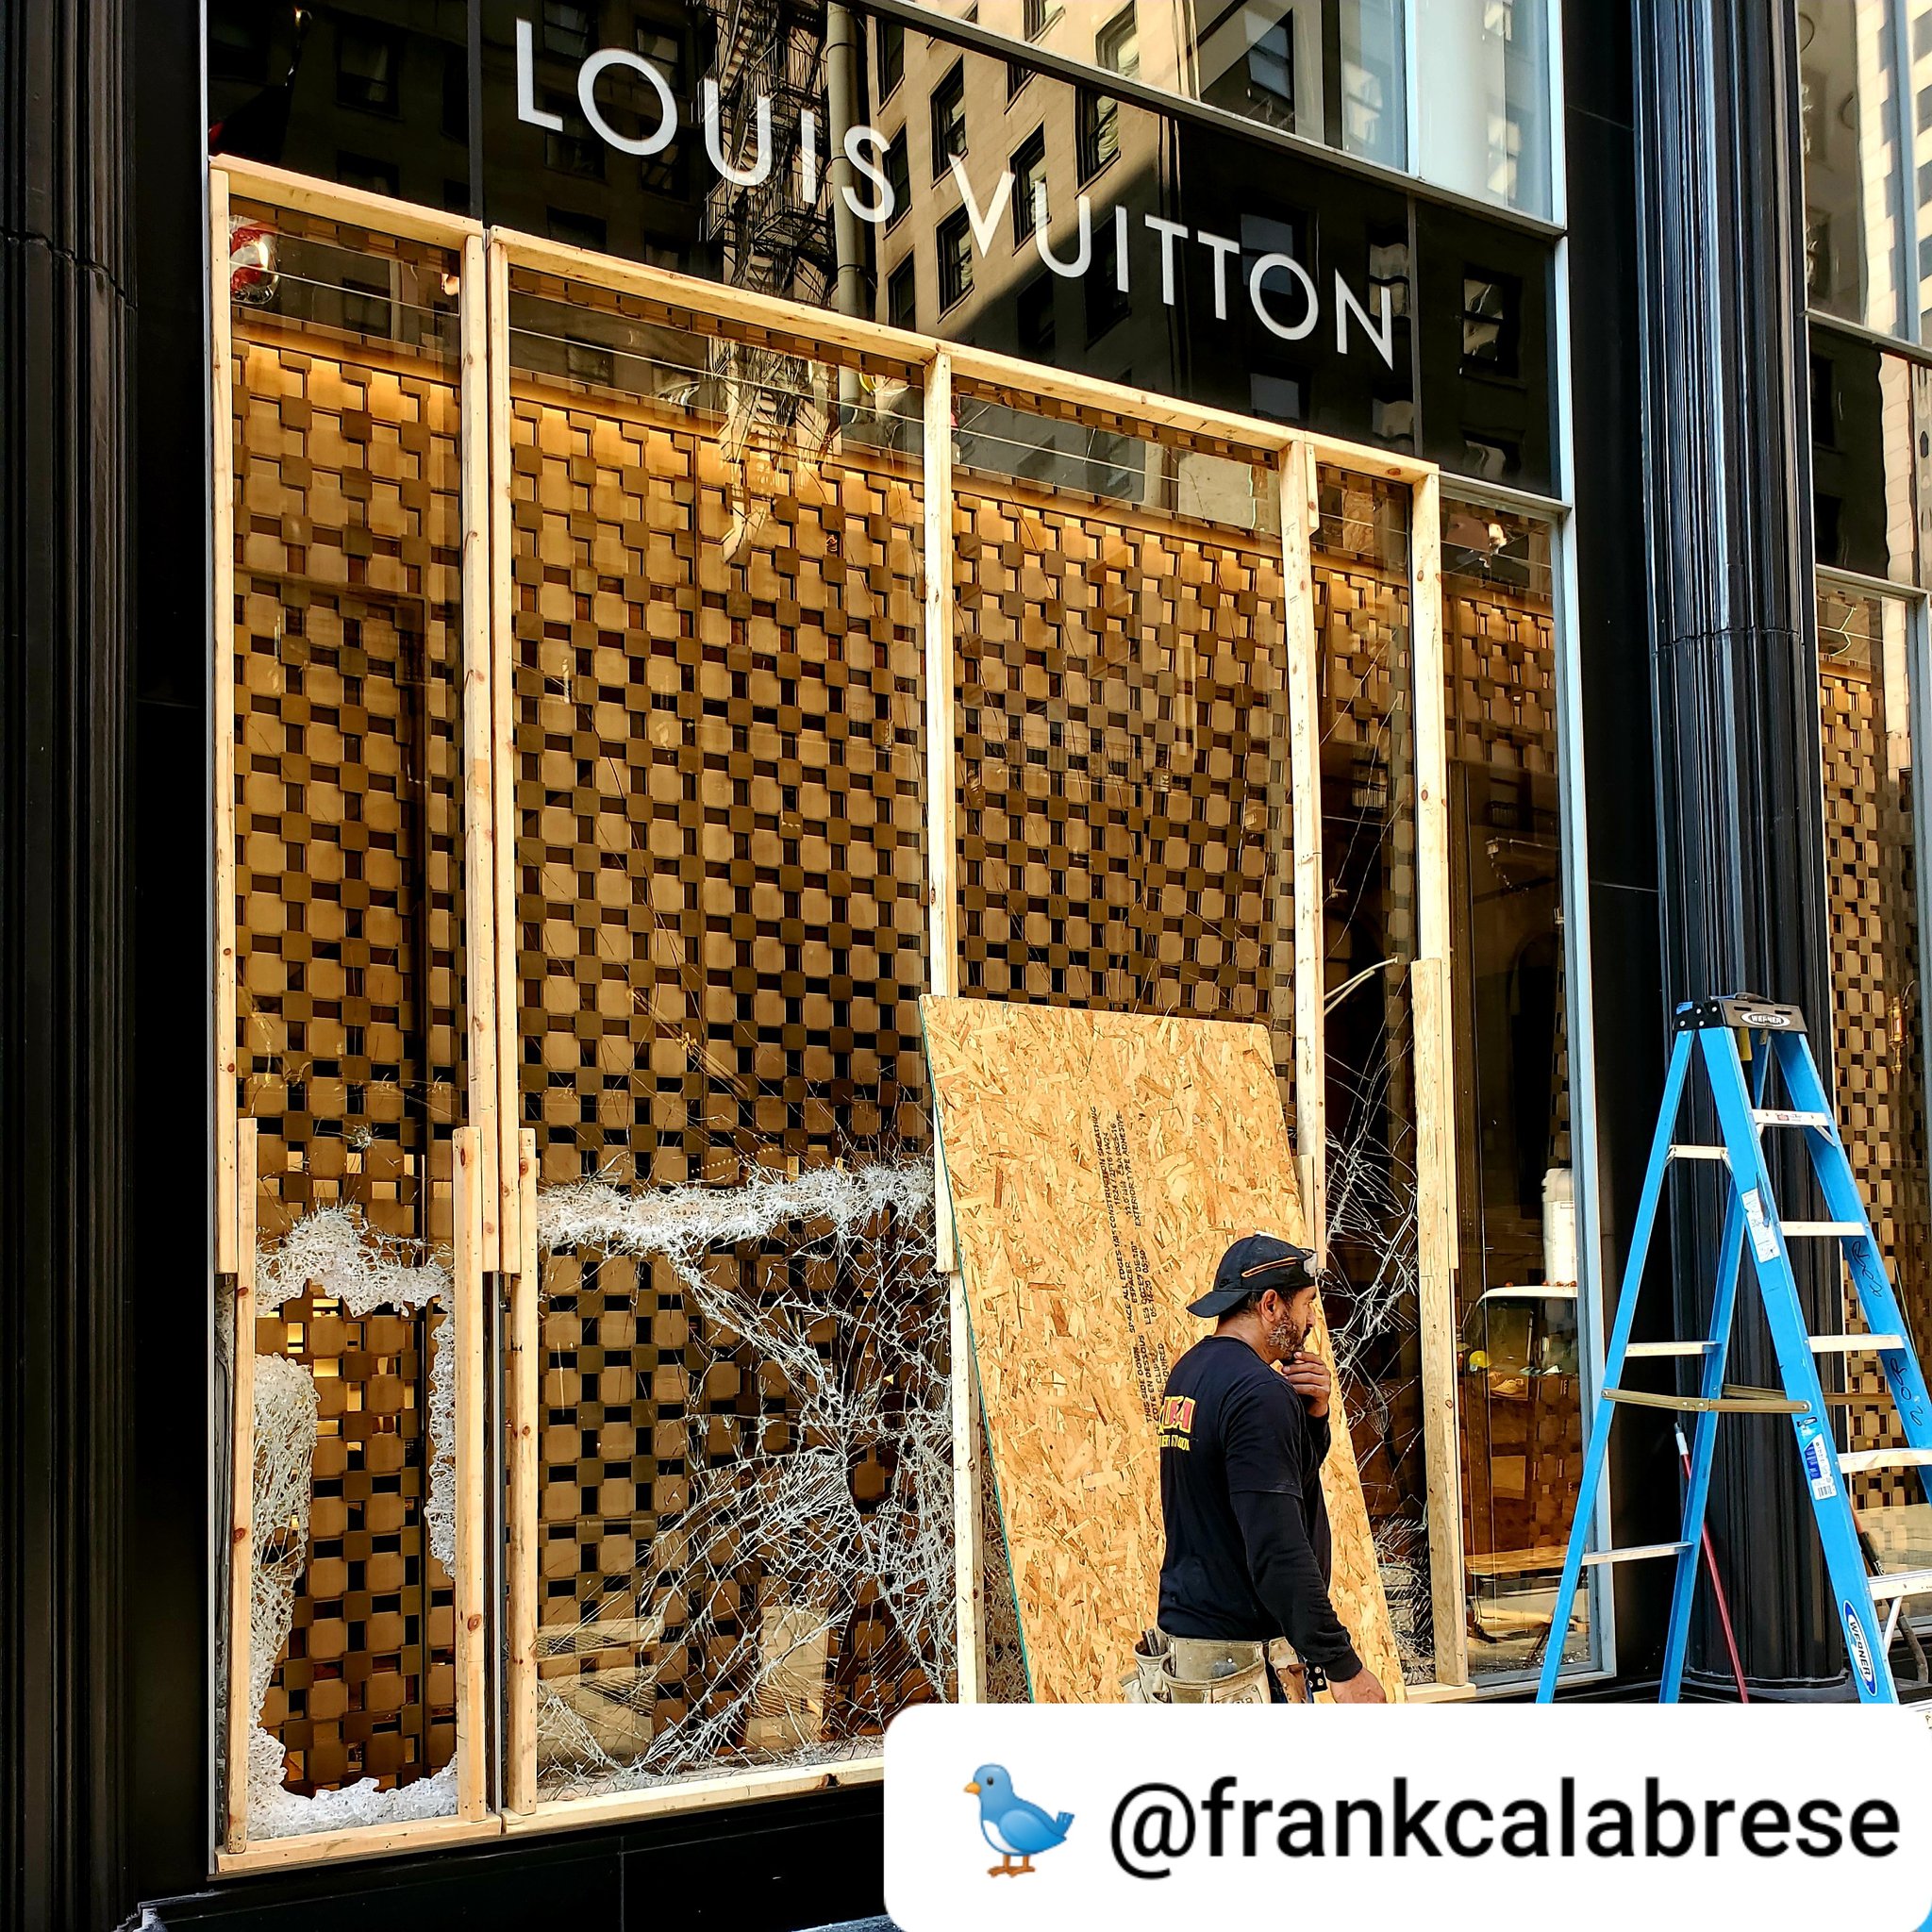 Frank Calabrese on X: Louis Vuitton in Chicago was completely